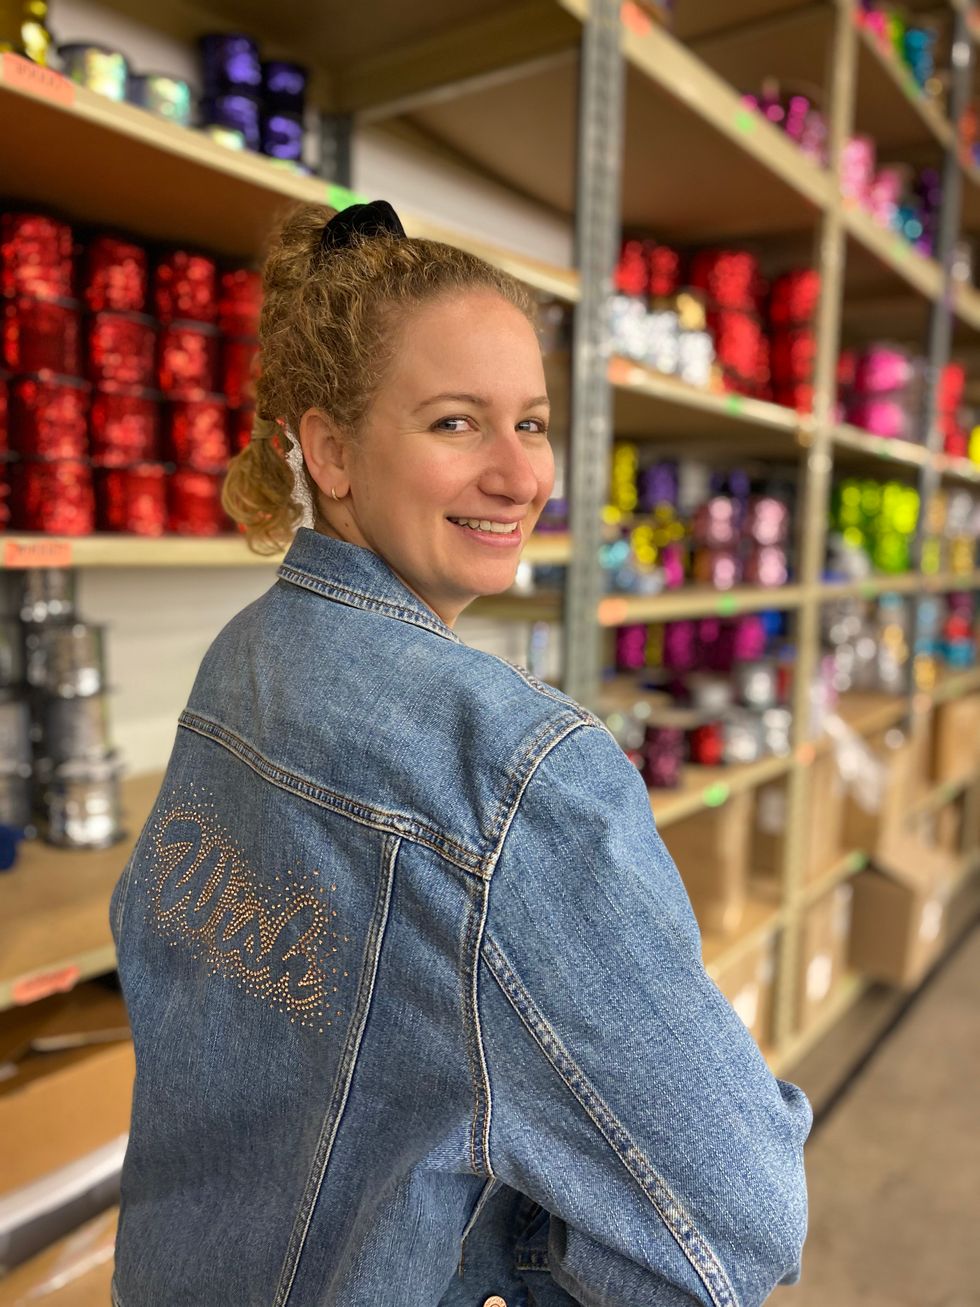 A woman stands in front of a wall of shelves covered with rolls of colorful sequins. She wears a denim jacket that says "wish" on the back in rhinestones